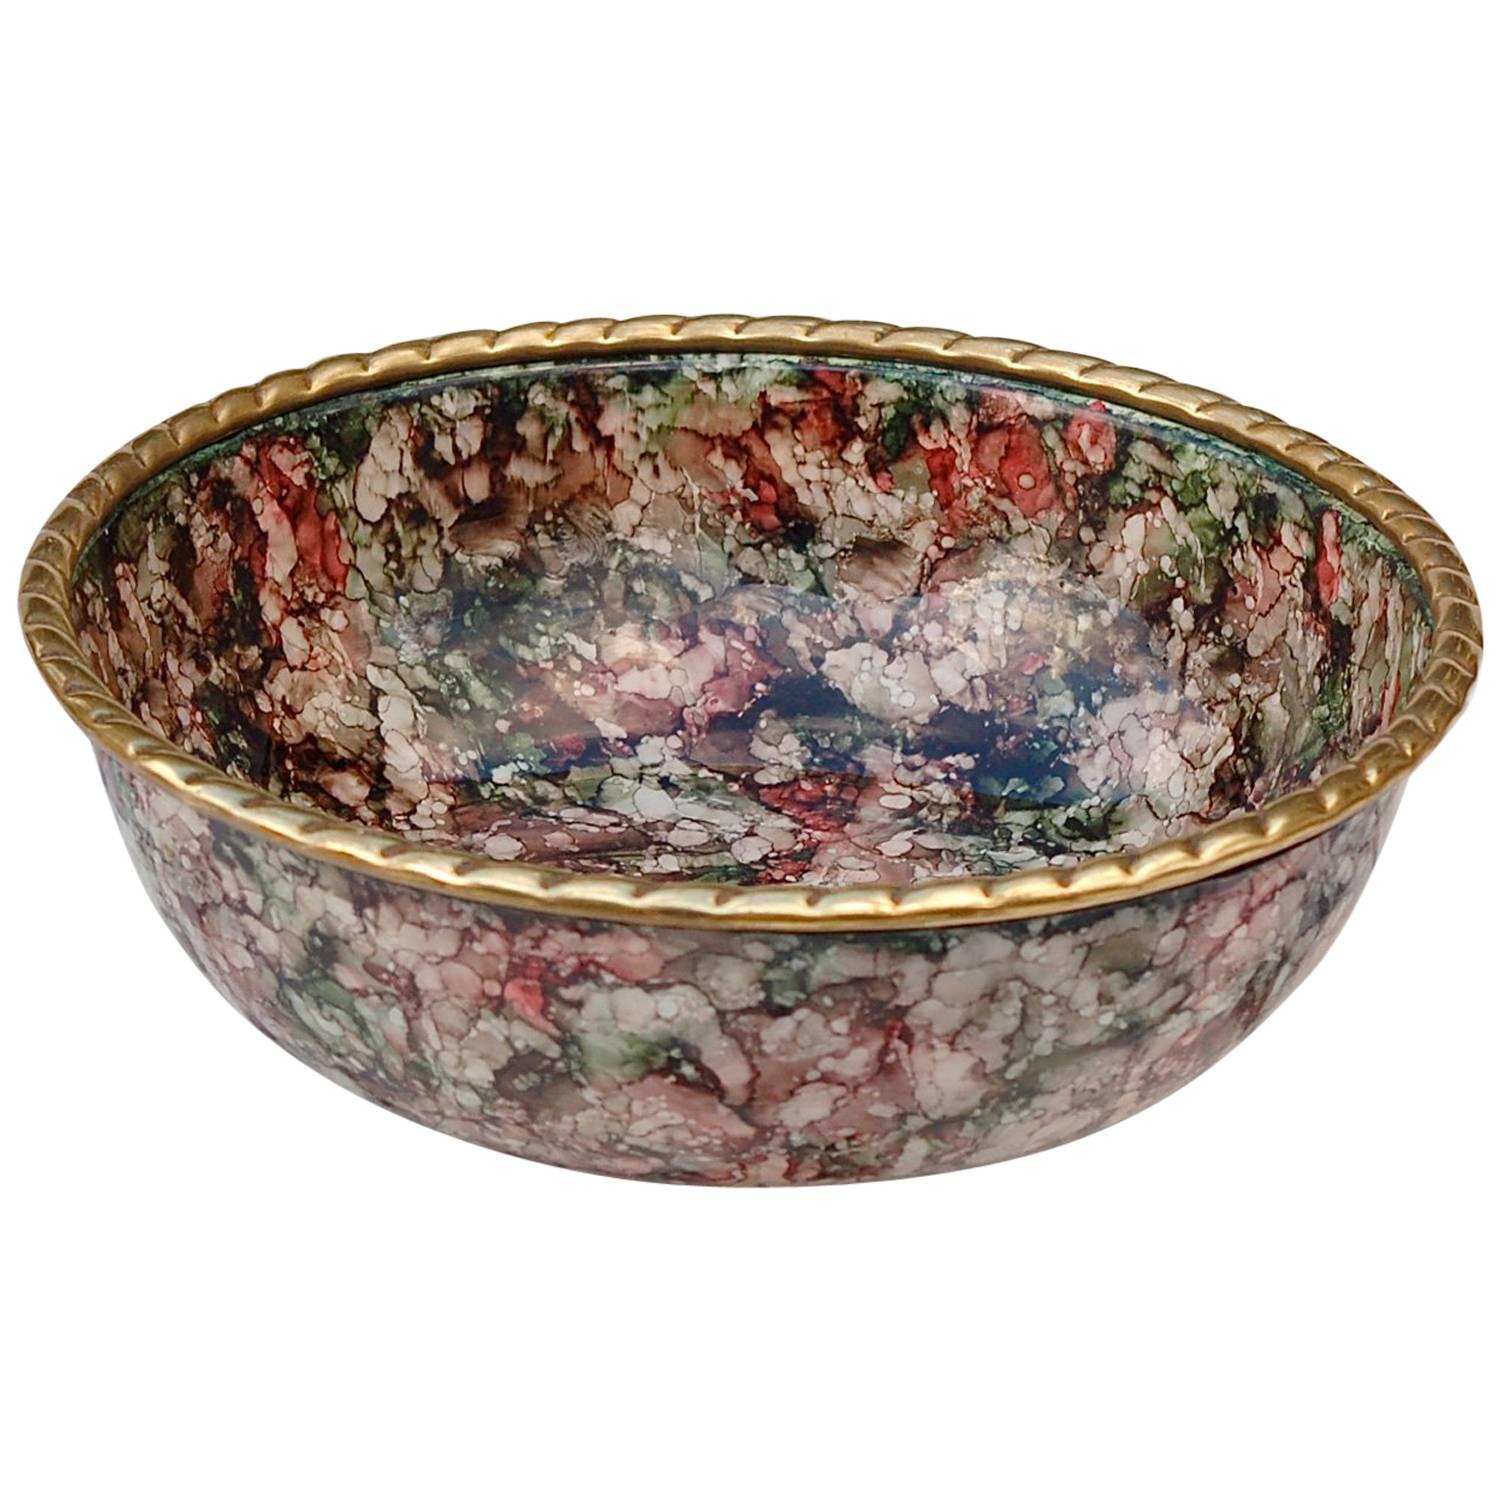 Solid Brass Multicolored Enamel Bowl, Late 20th Century, Italy